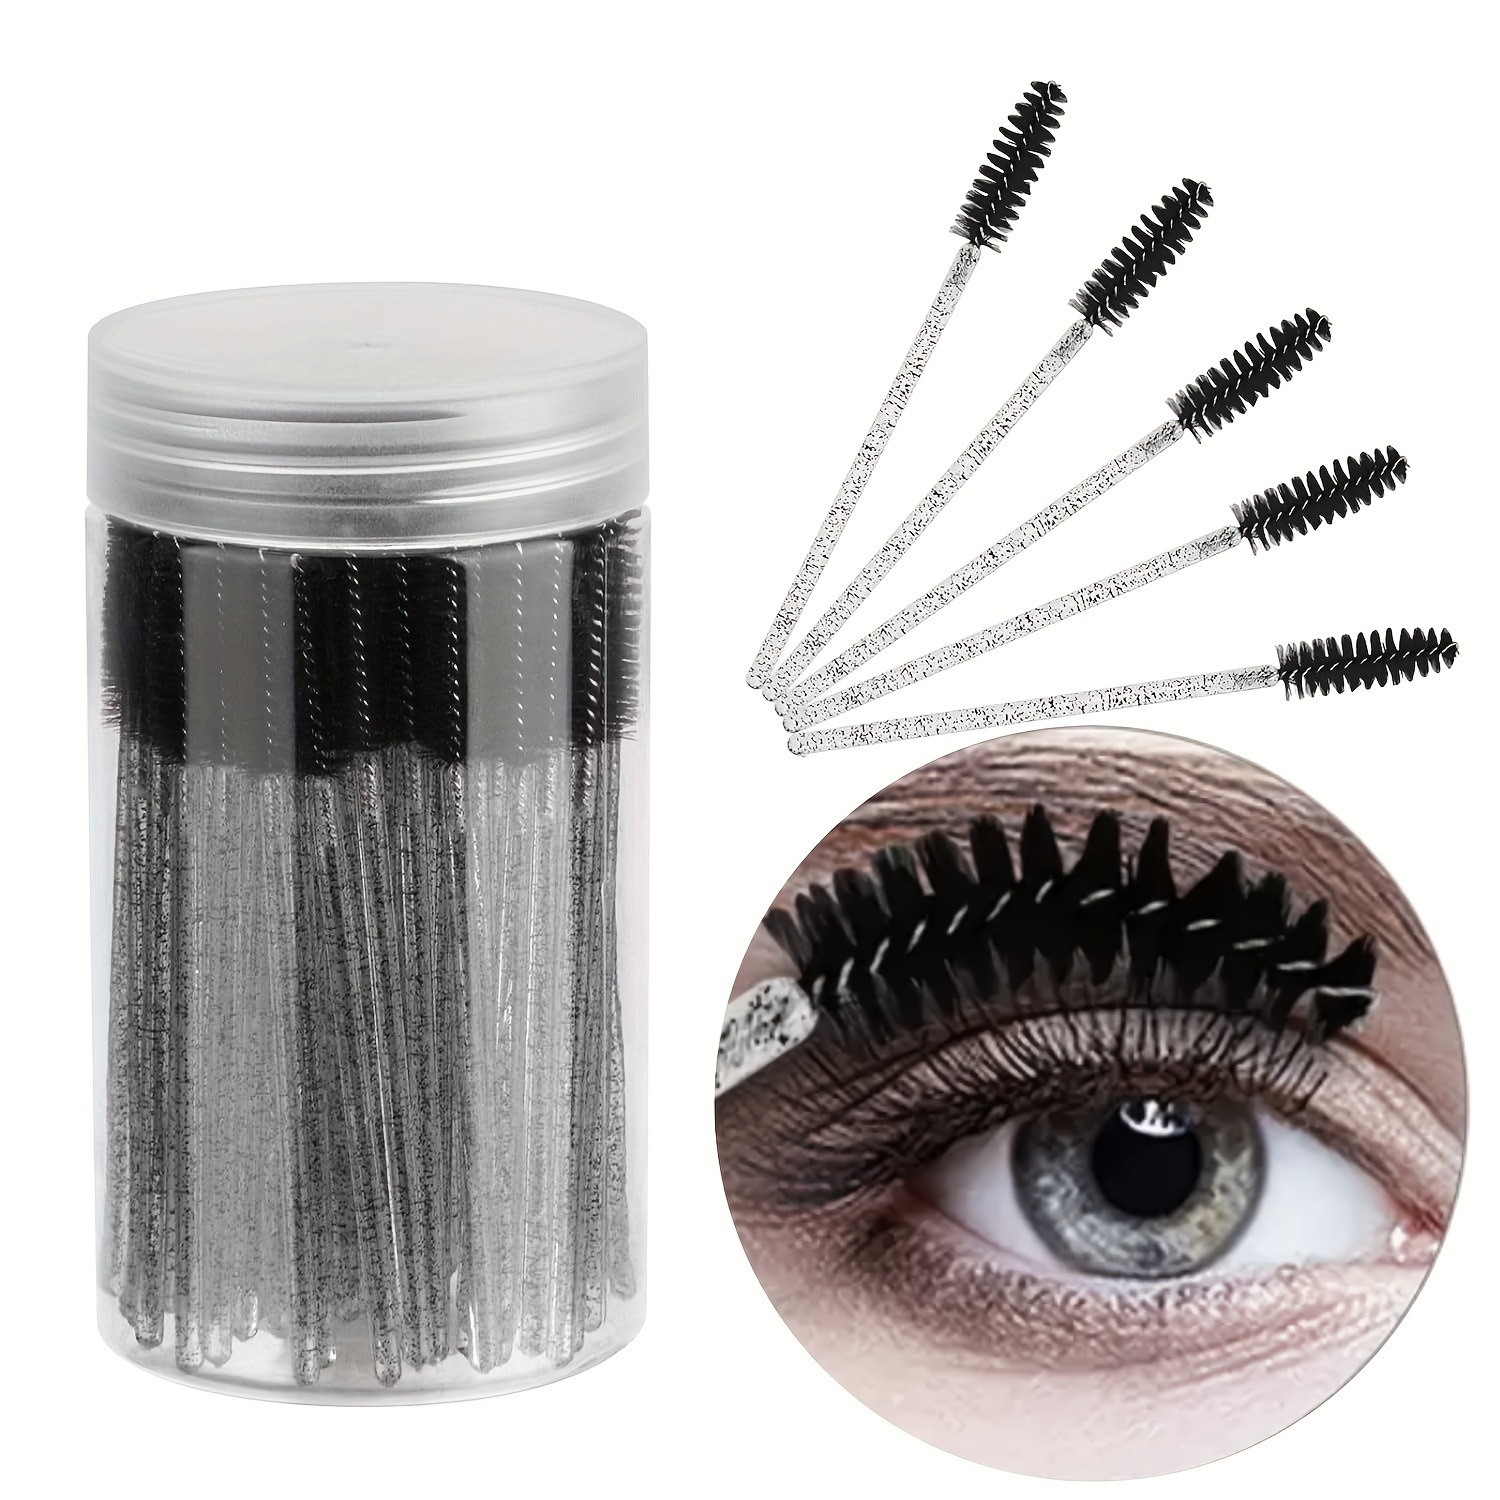 

100pcs Disposable Mascara Wands Set, Abs Plastic Brush Rod, Nylon Bristle, Eyelash And Eyebrow Brushes, Unscented, Normal Skin Compatible, Mascara Applicator Wand Kit With Storage Container